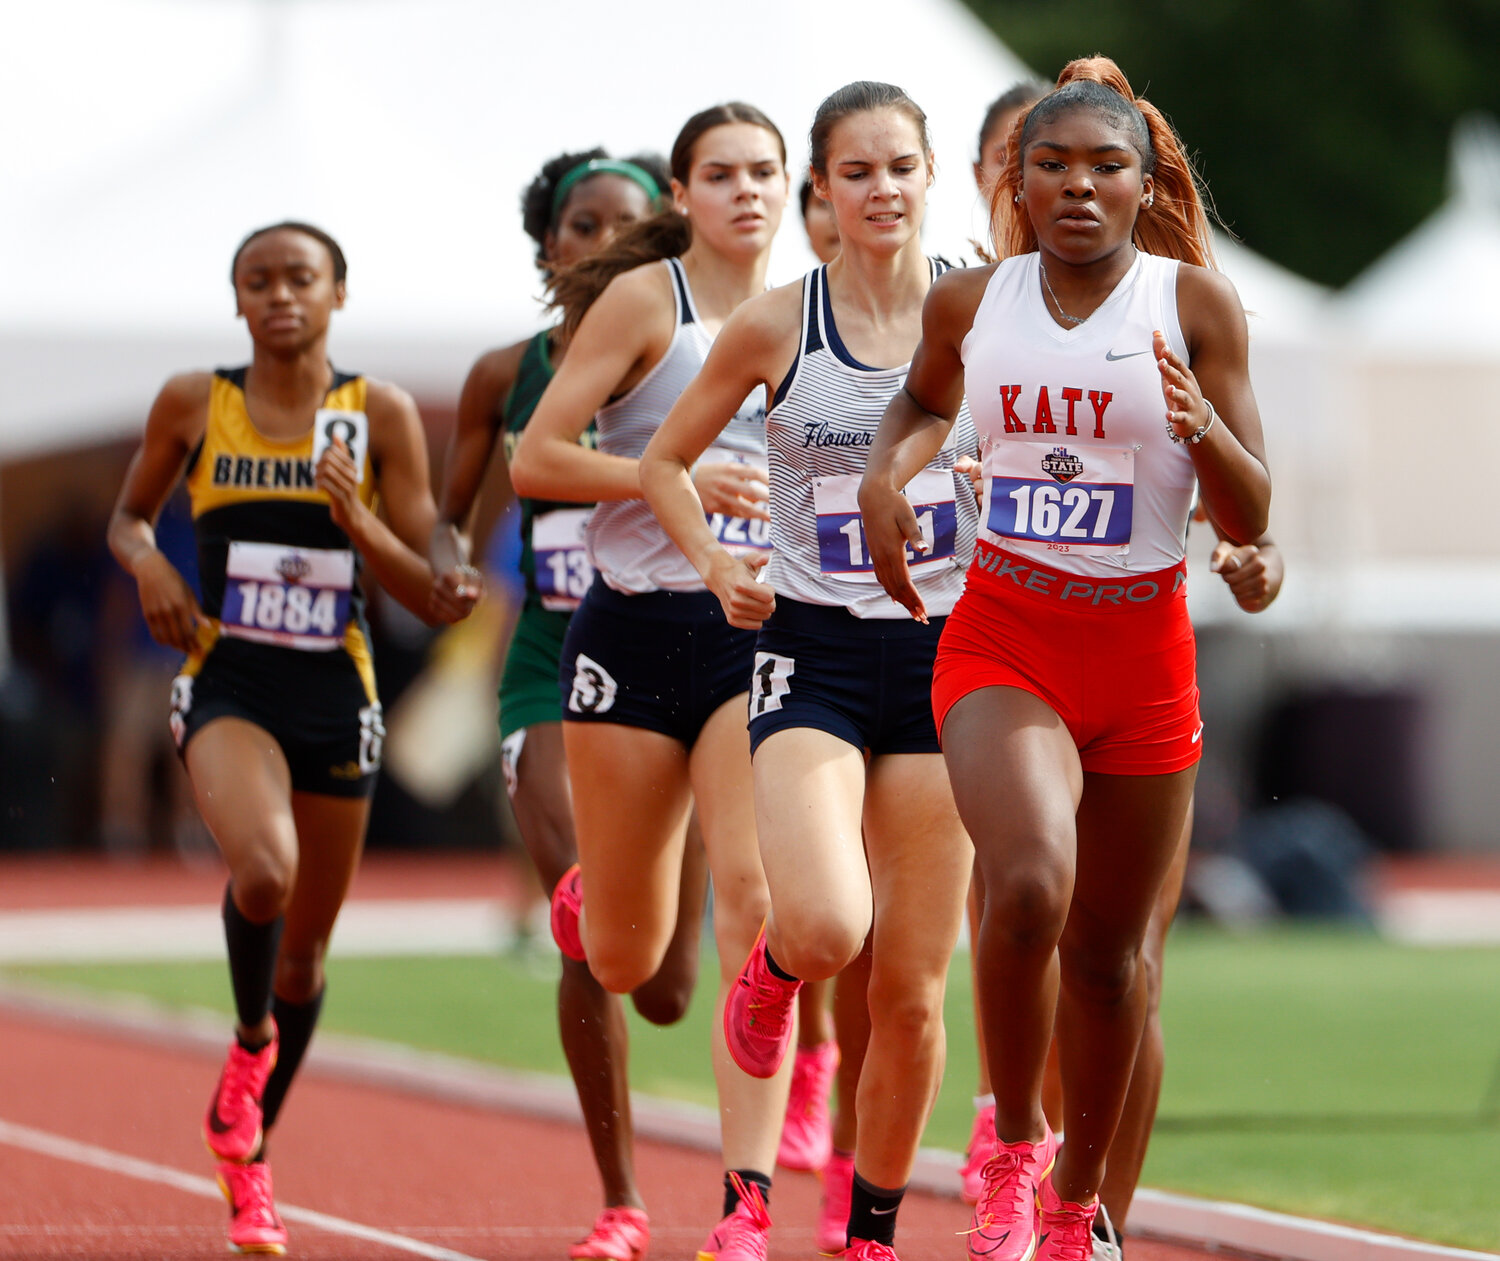 Elizabeth Brooks of Katy High School (1627) runs in the Class 6A 800-meter run during the UIL State Track and Field Meet on Saturday, May 13, 2023 in Austin.